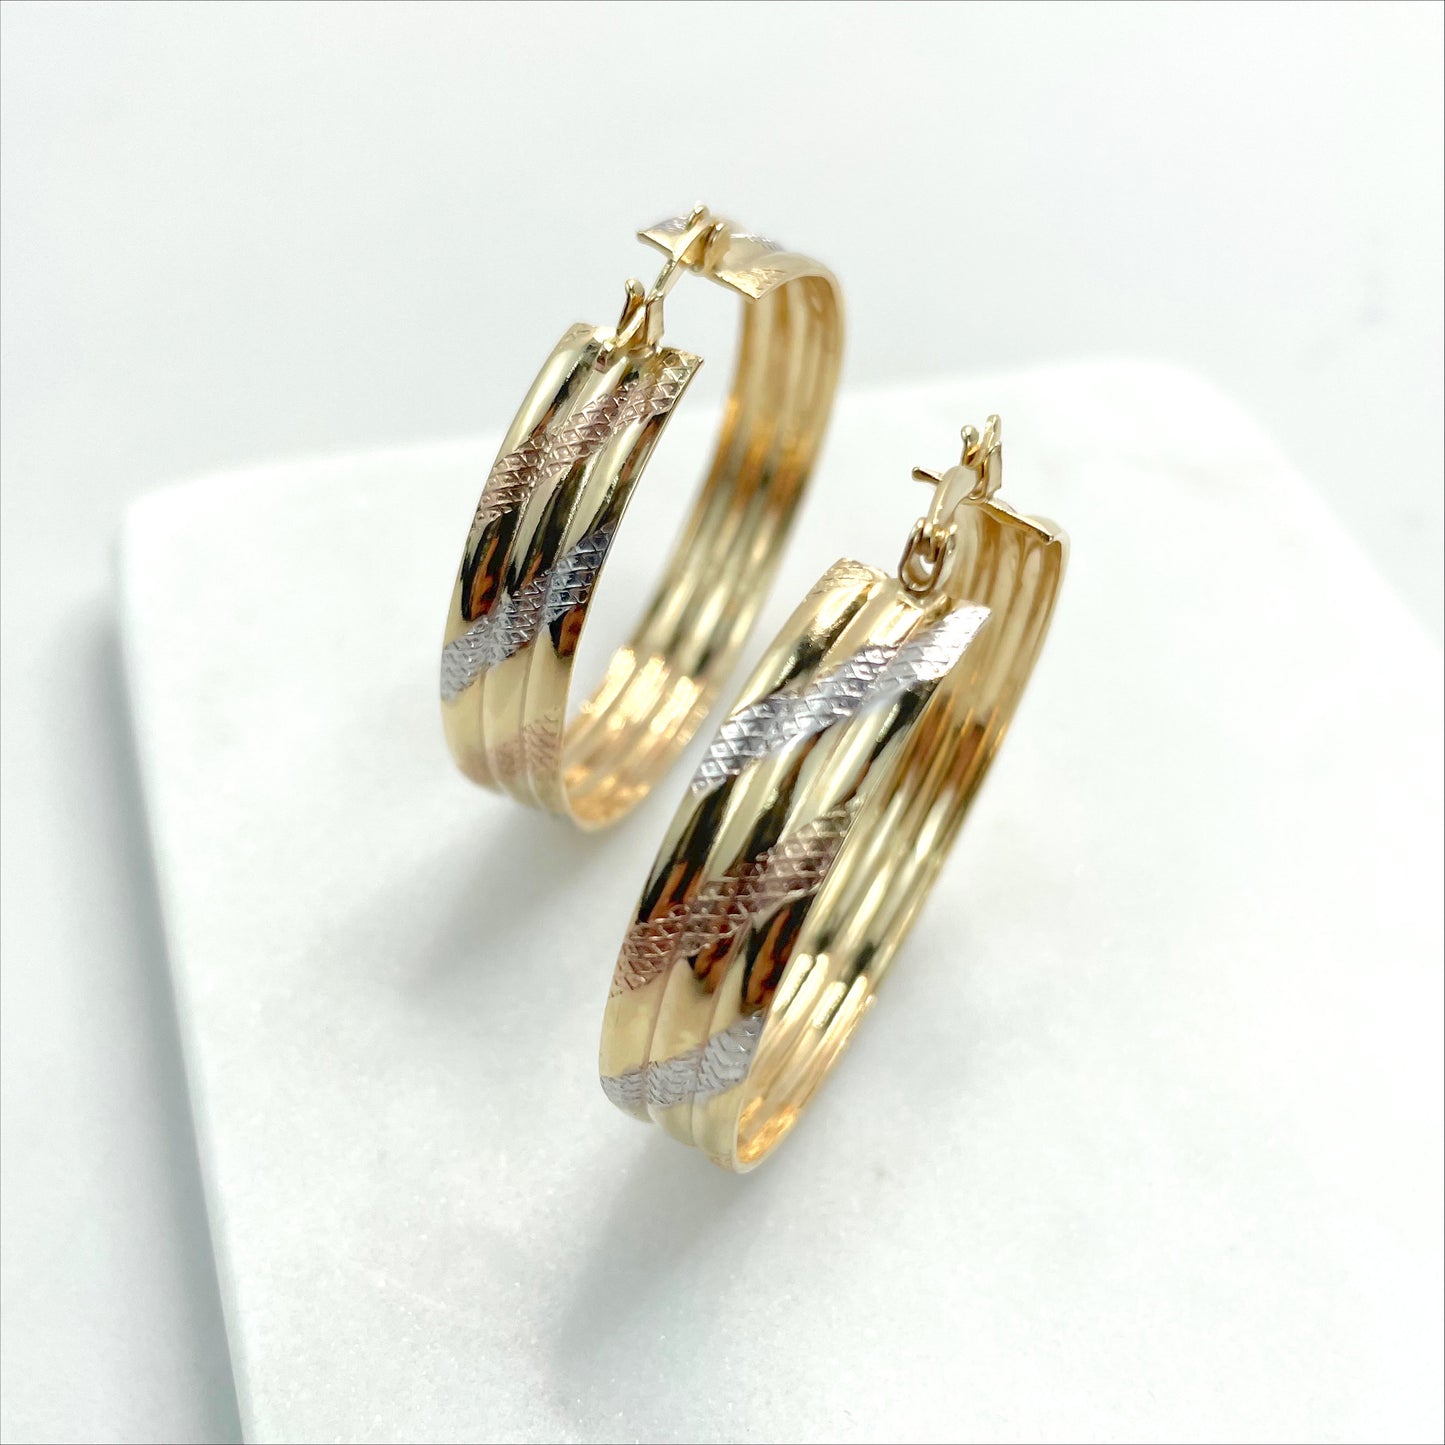 18k White or Gold Filled Two Tone Texturized 37mm x 42mm Hoop Earrings Wholesale Jewelry Supplies